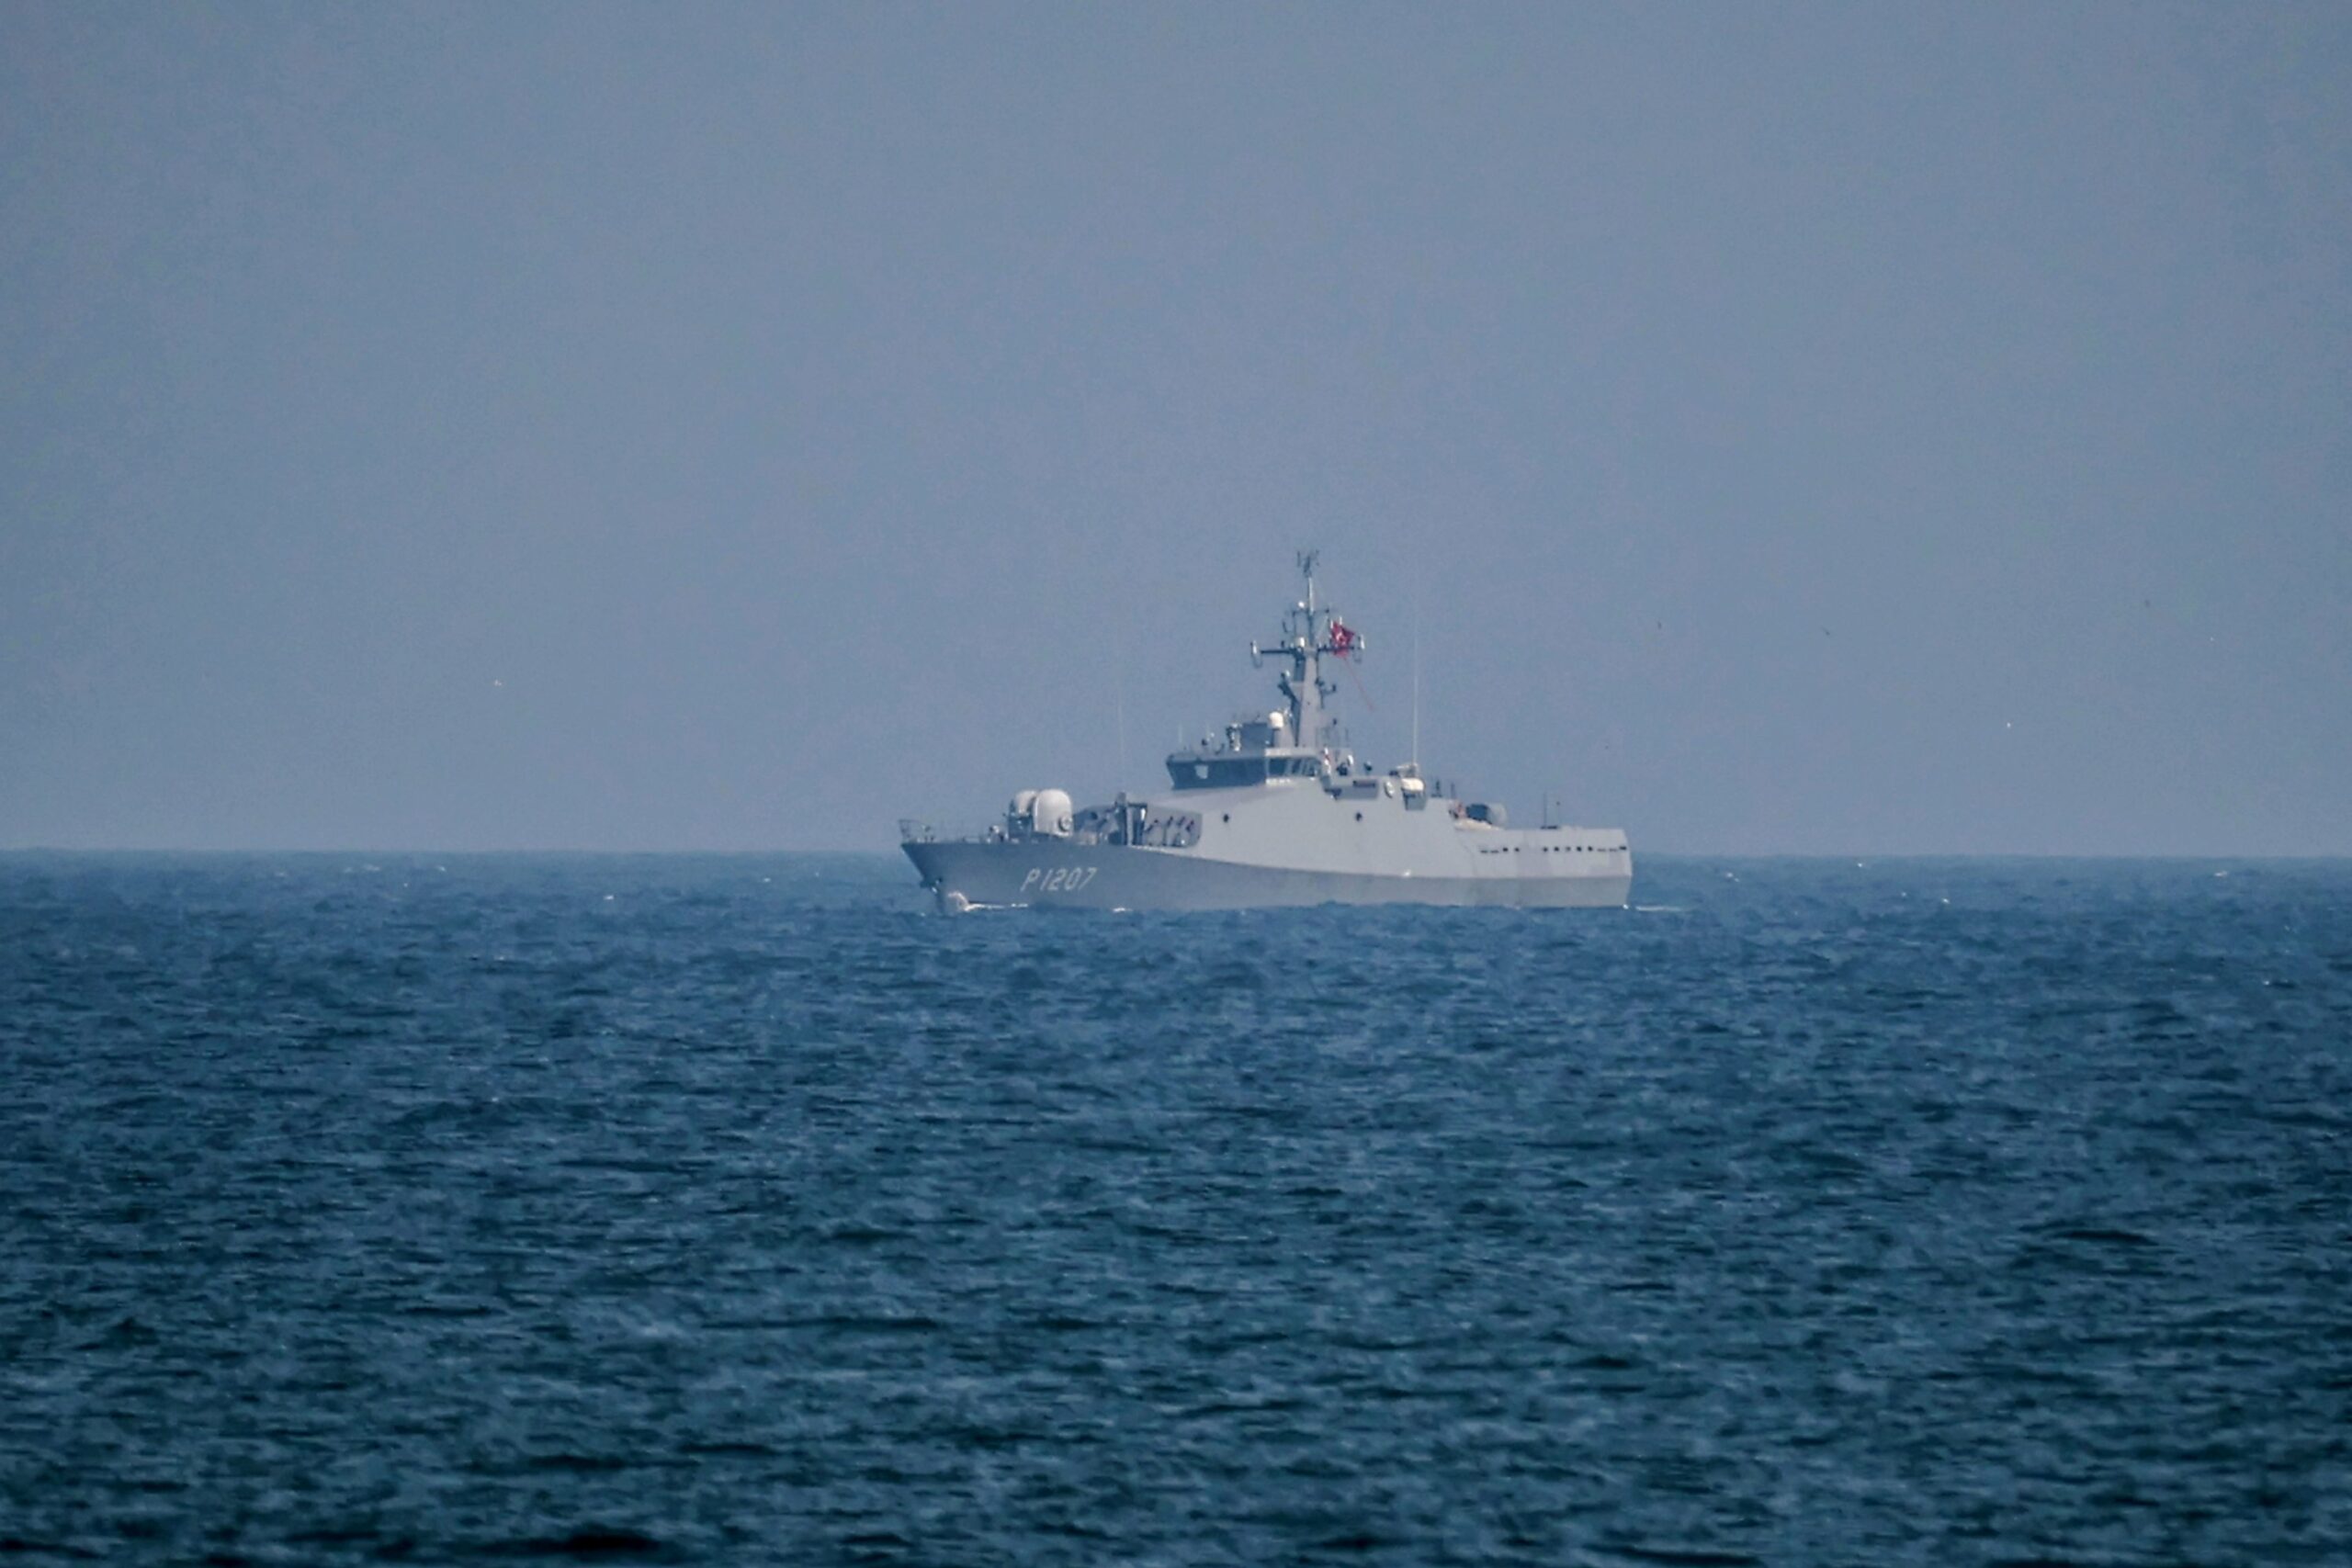 A Turkish naval patrol boat in an undisclosed location in the Black Sea